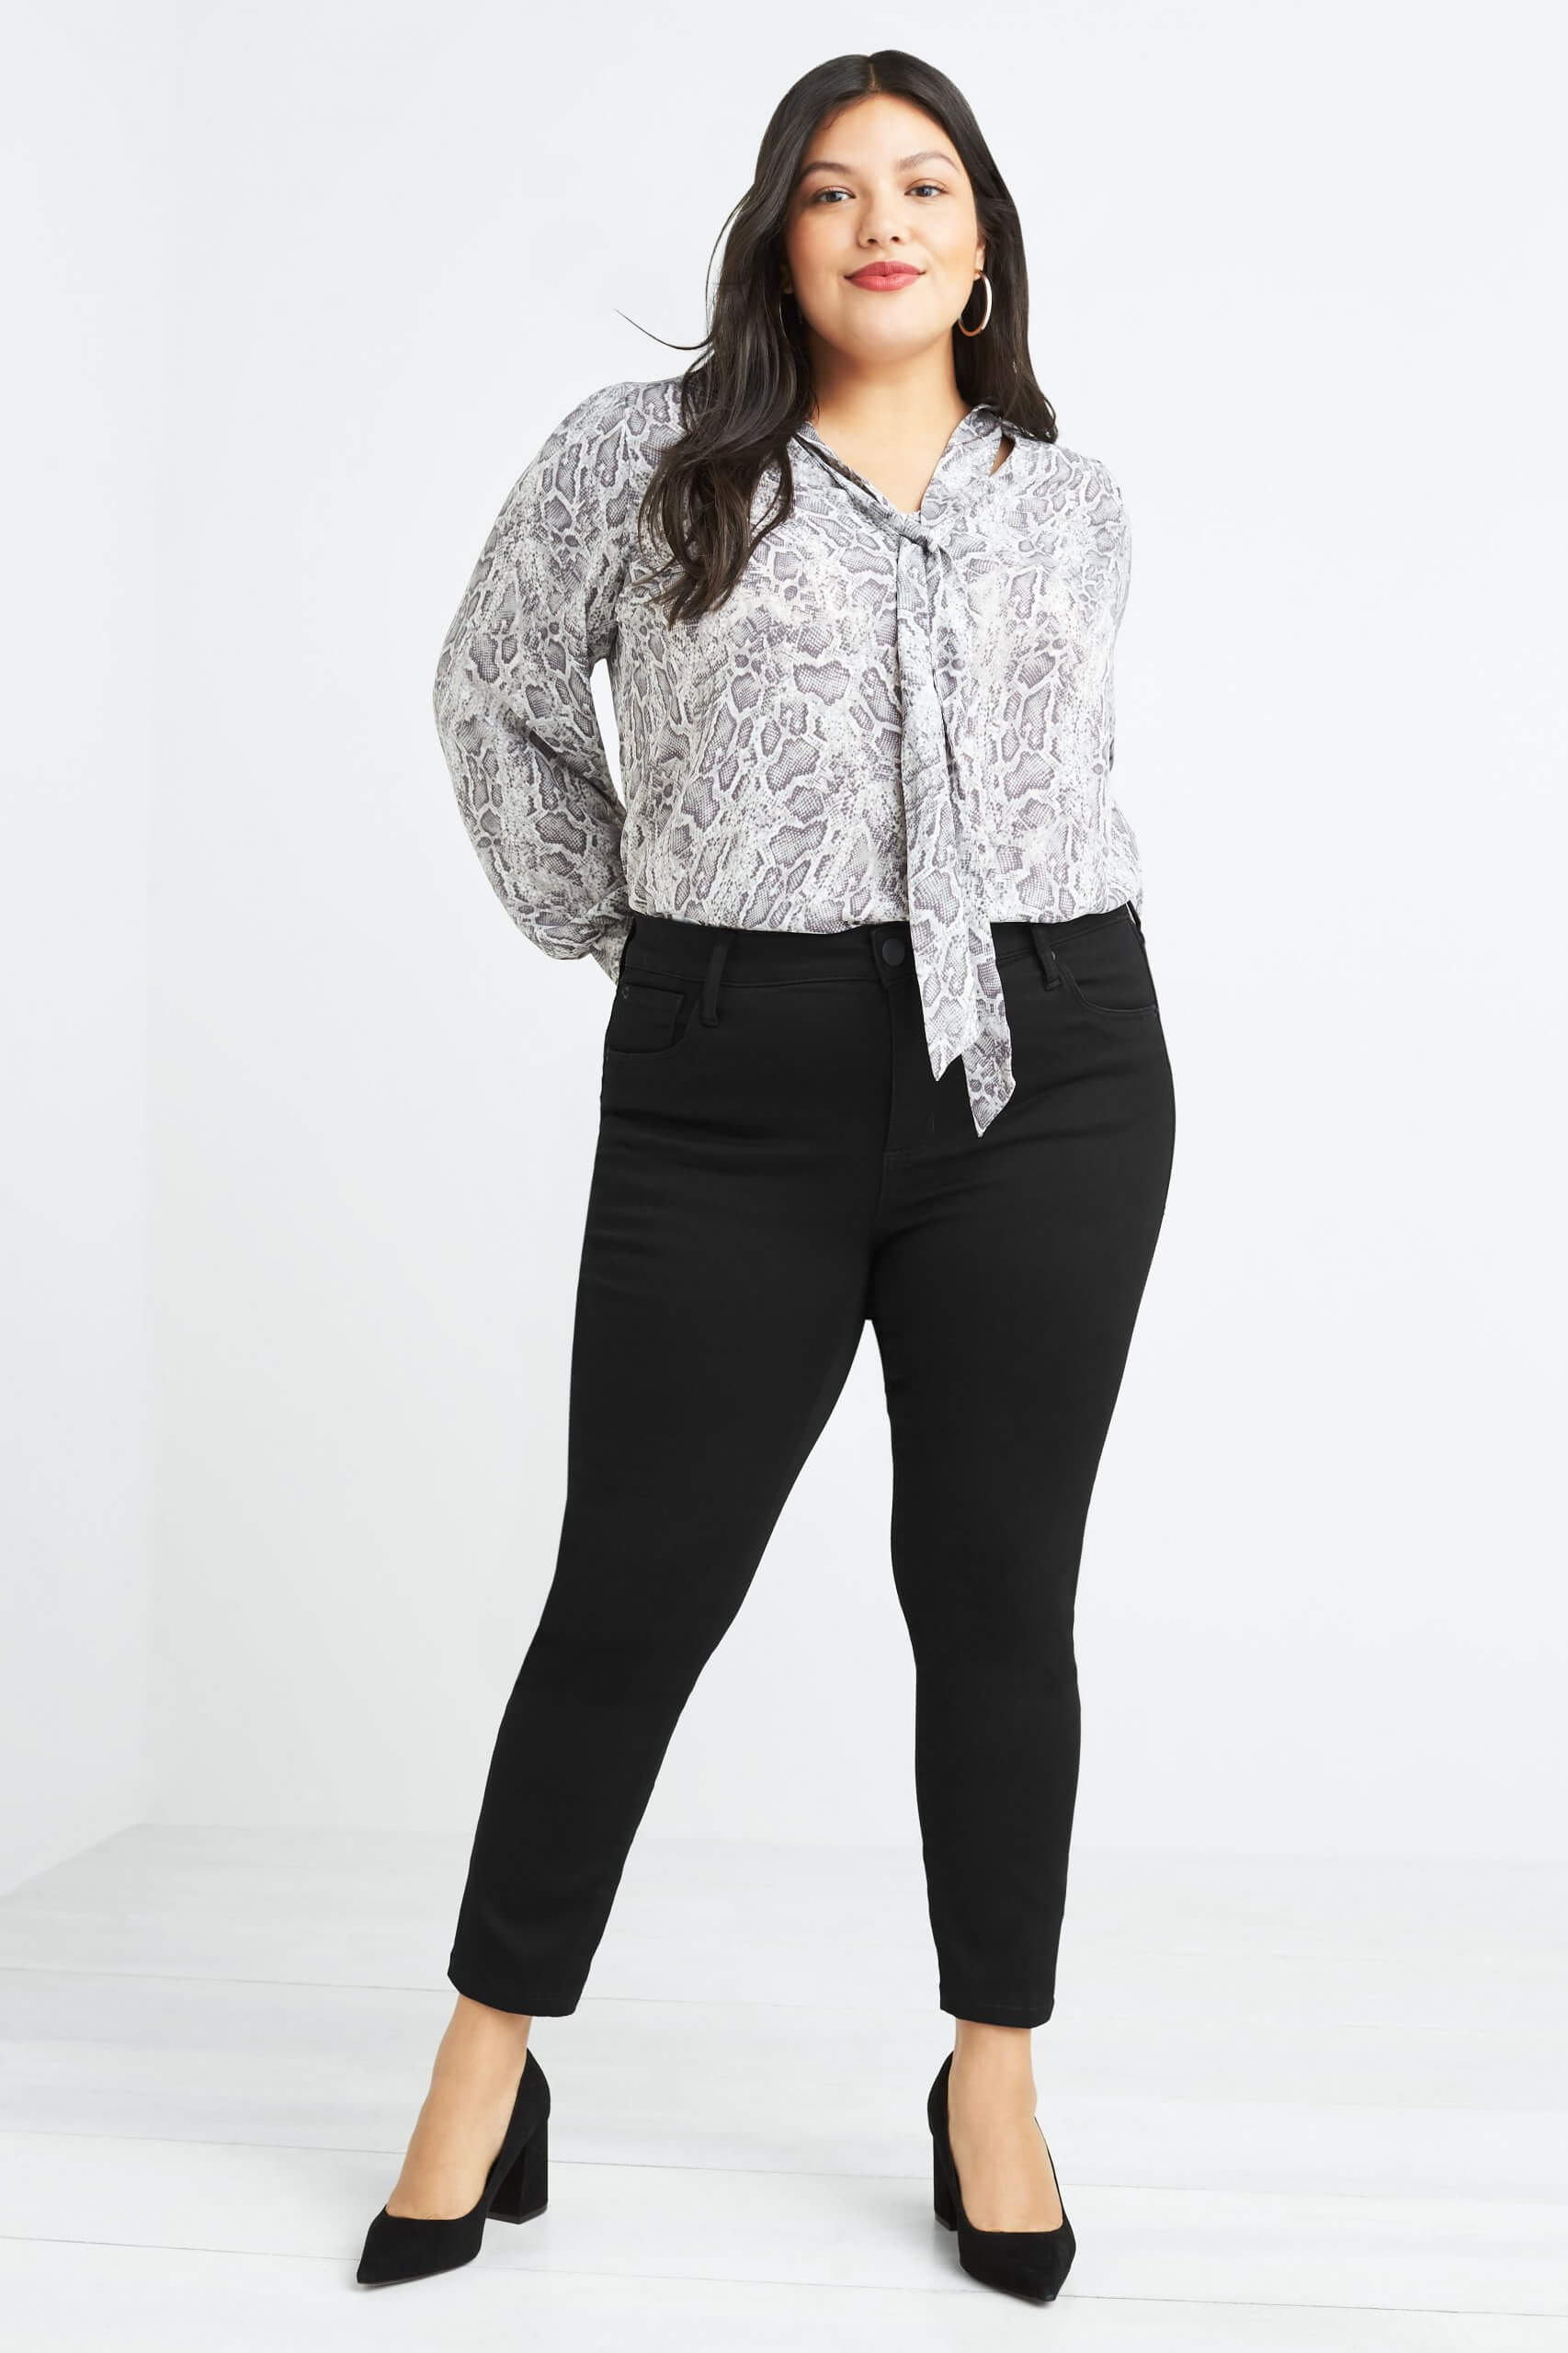 Stitch Fix women's model wearing plus-size clothing featuring snakeskin print tie-neck blouse, black skinny pants and black heels.